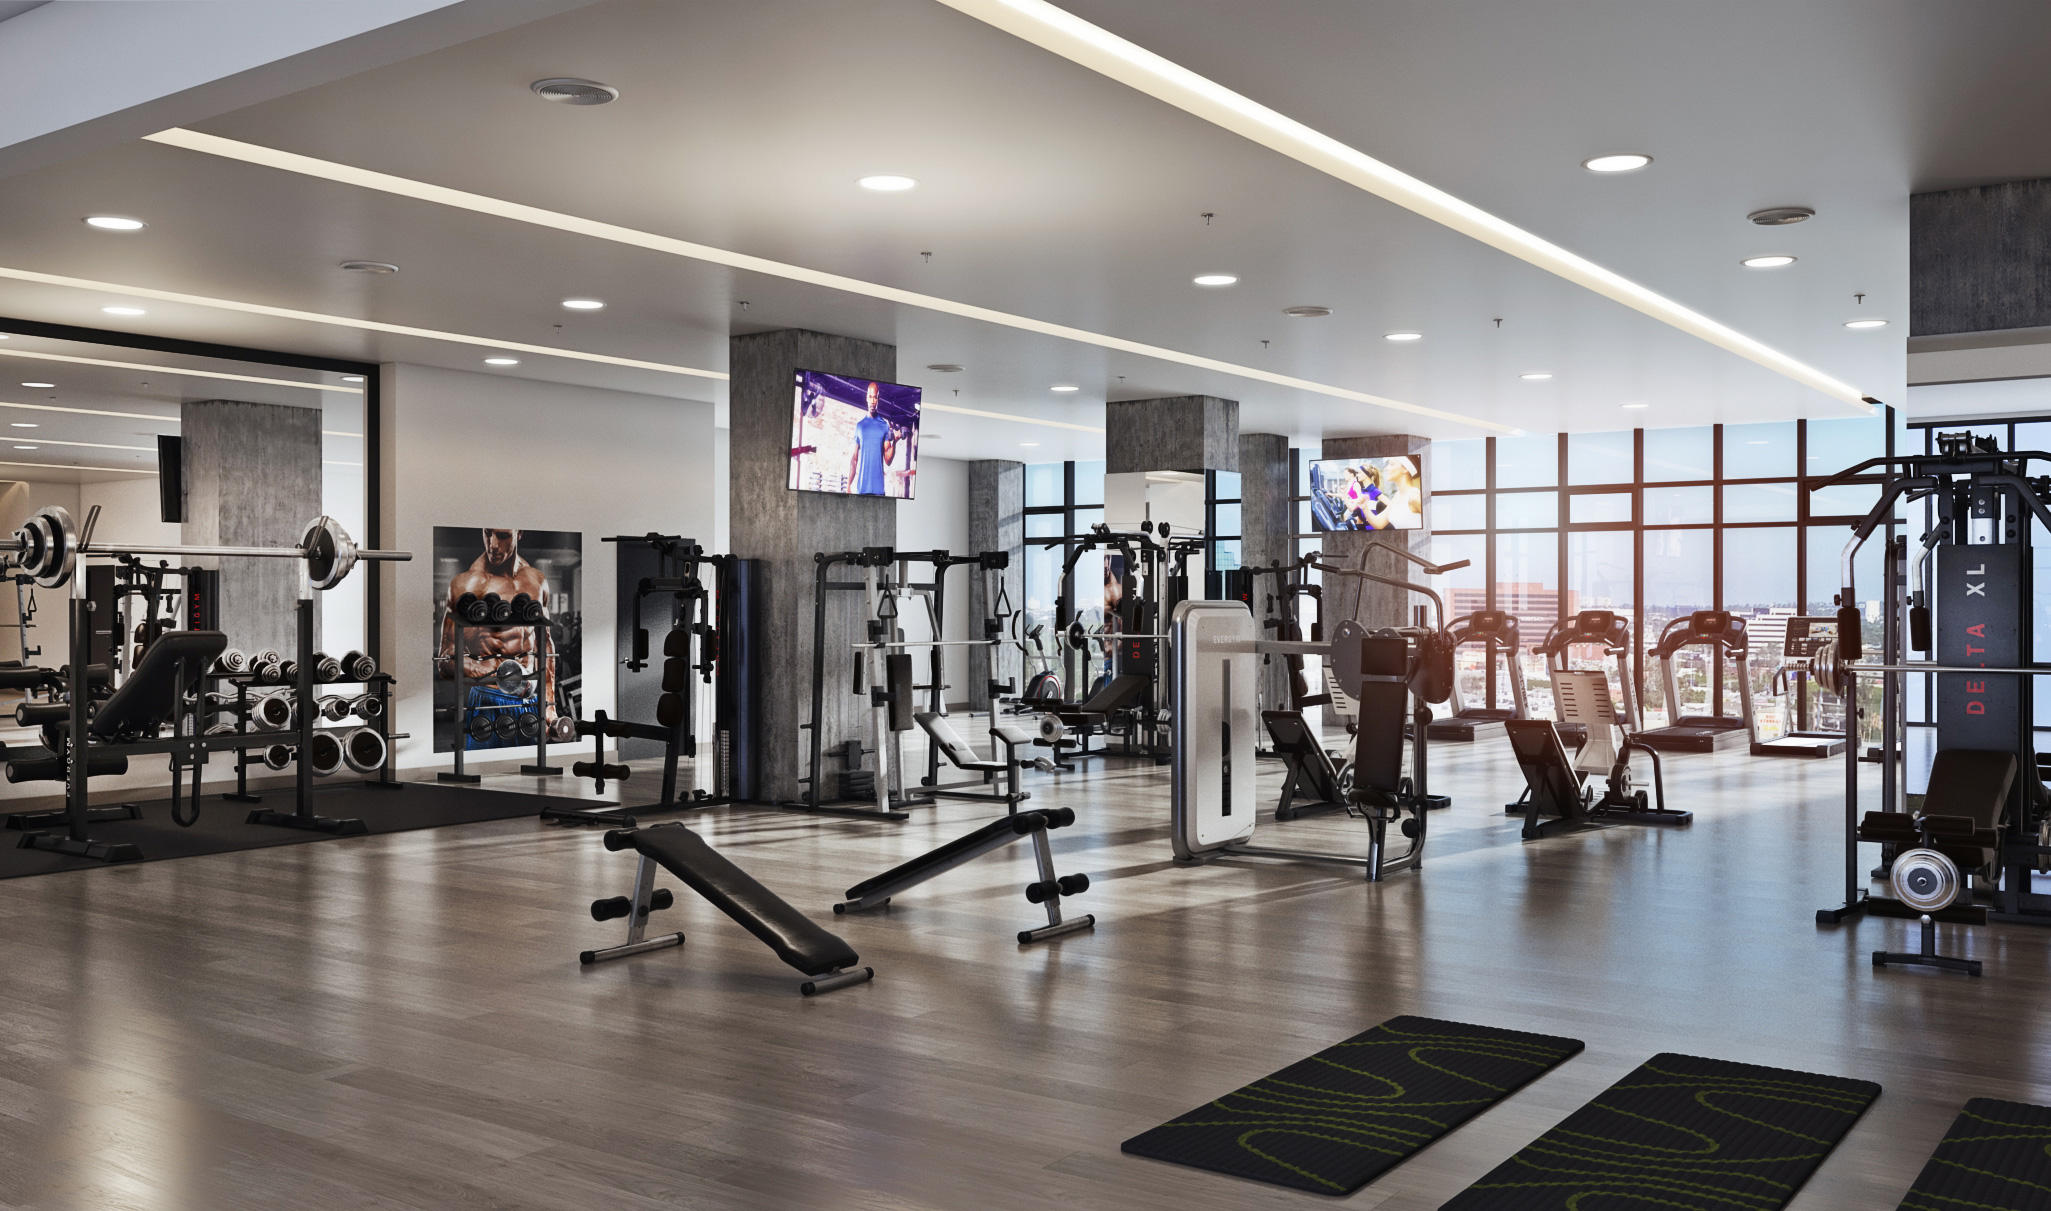 Interior of well appointed gym with city views through wall of windows